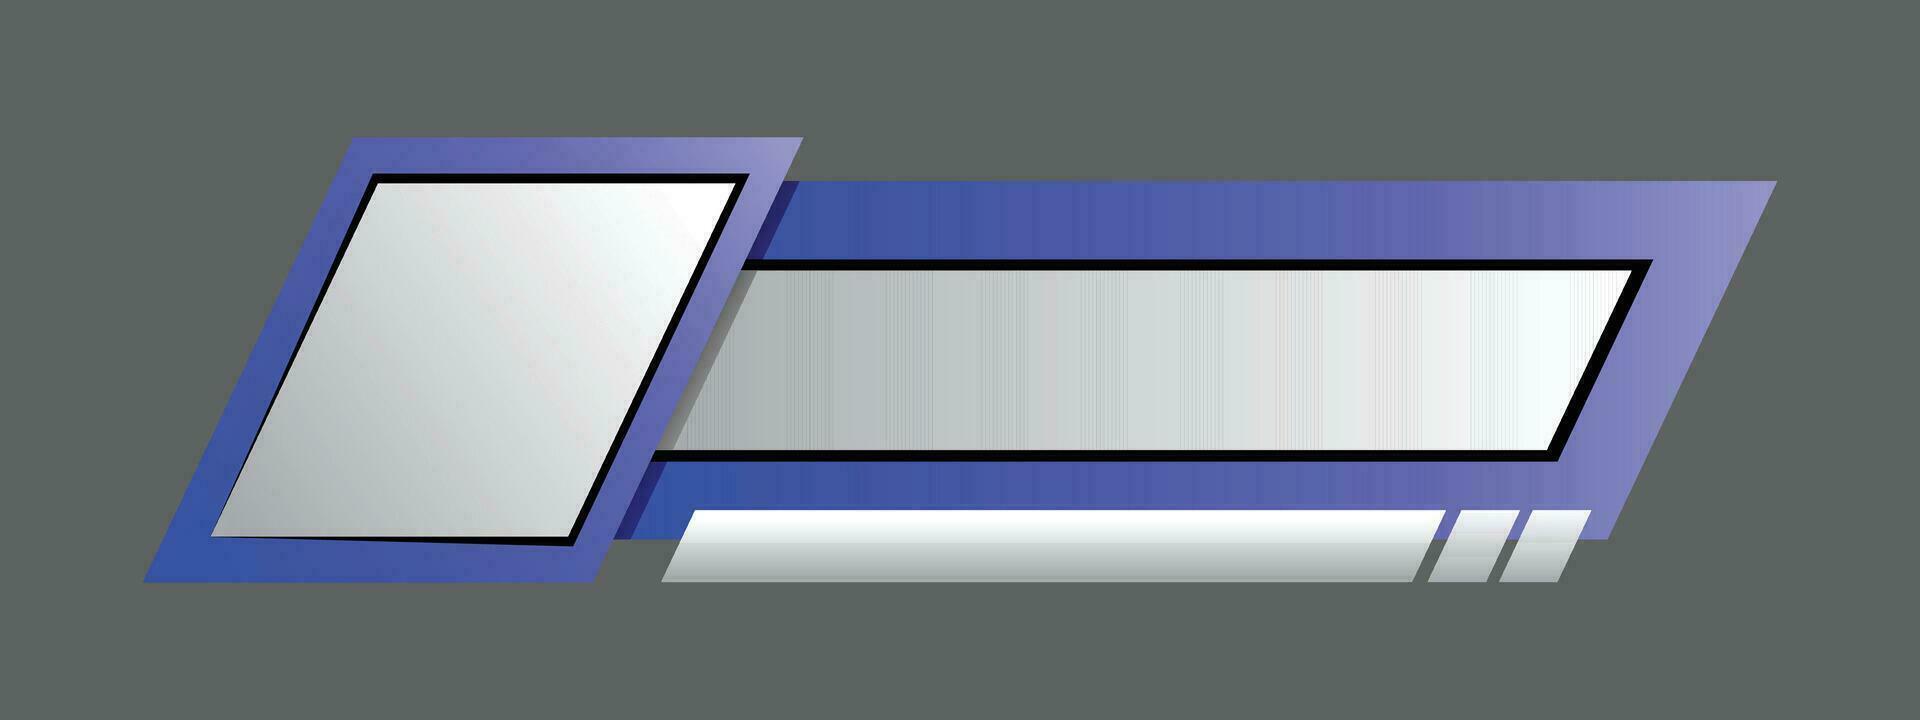 Simple Modern Lower Third In Blue For TV Shows, Streaming And Perfect For News vector